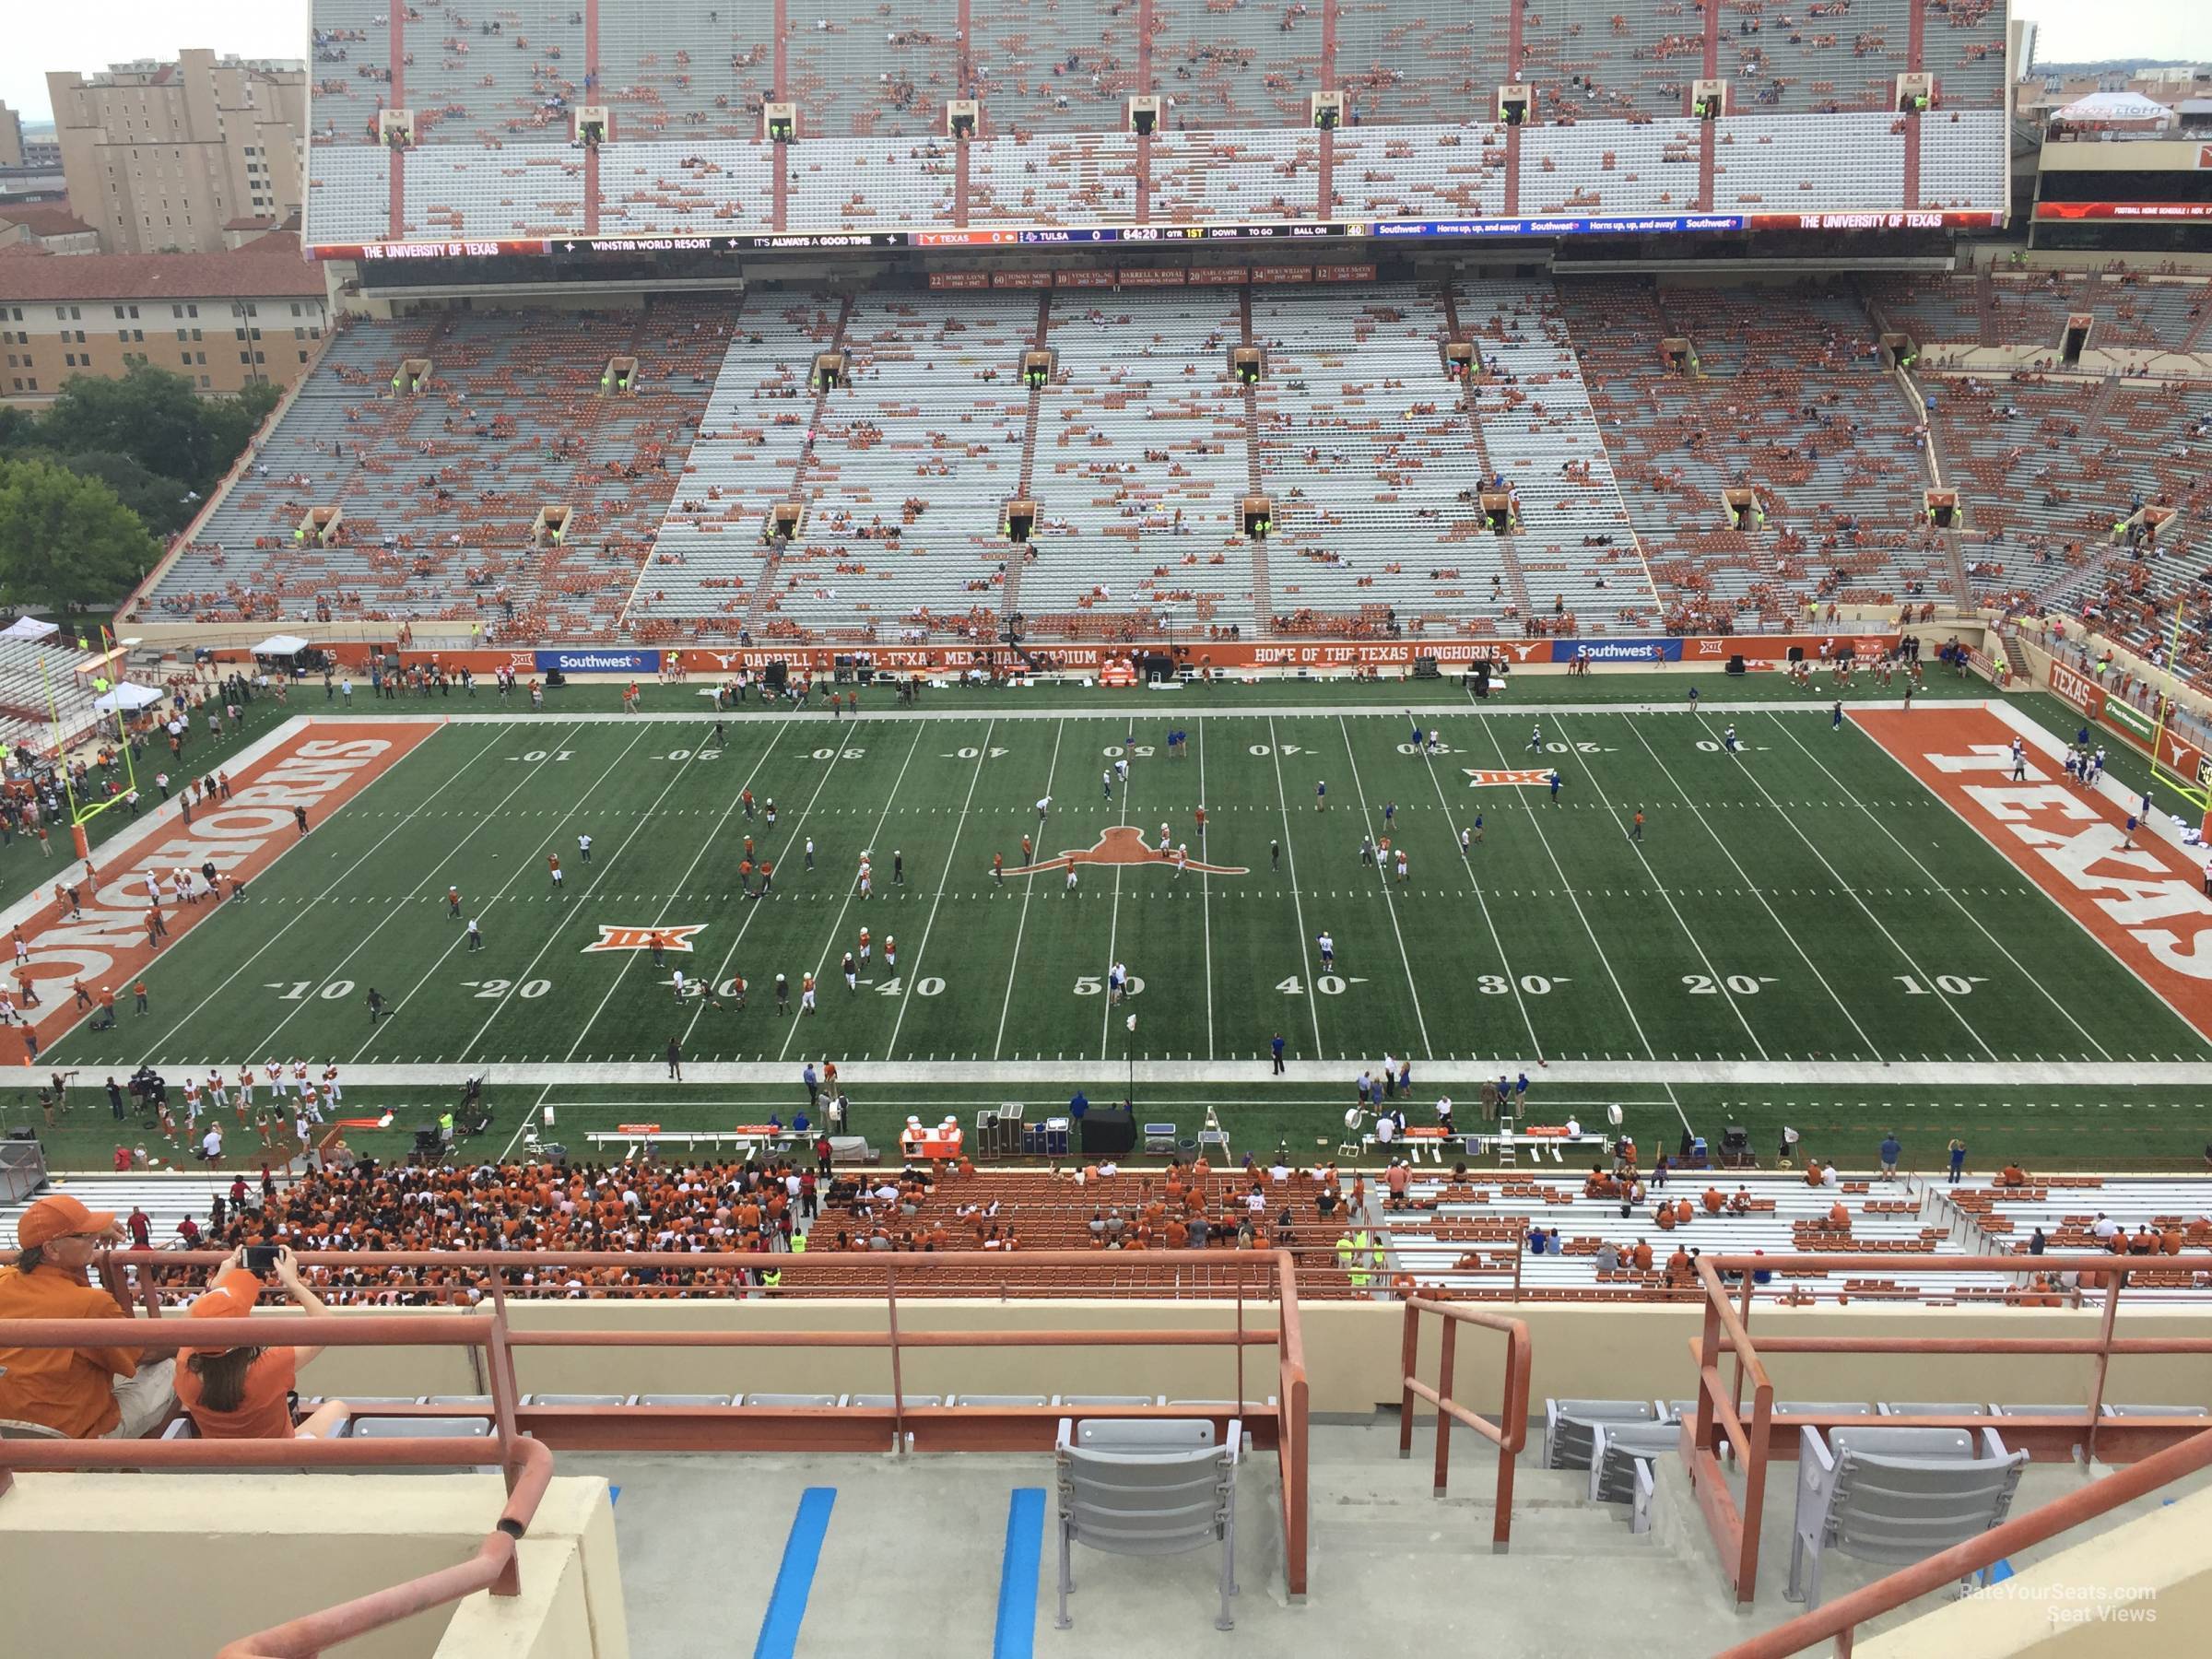 section 128, row 10 seat view  - dkr-texas memorial stadium